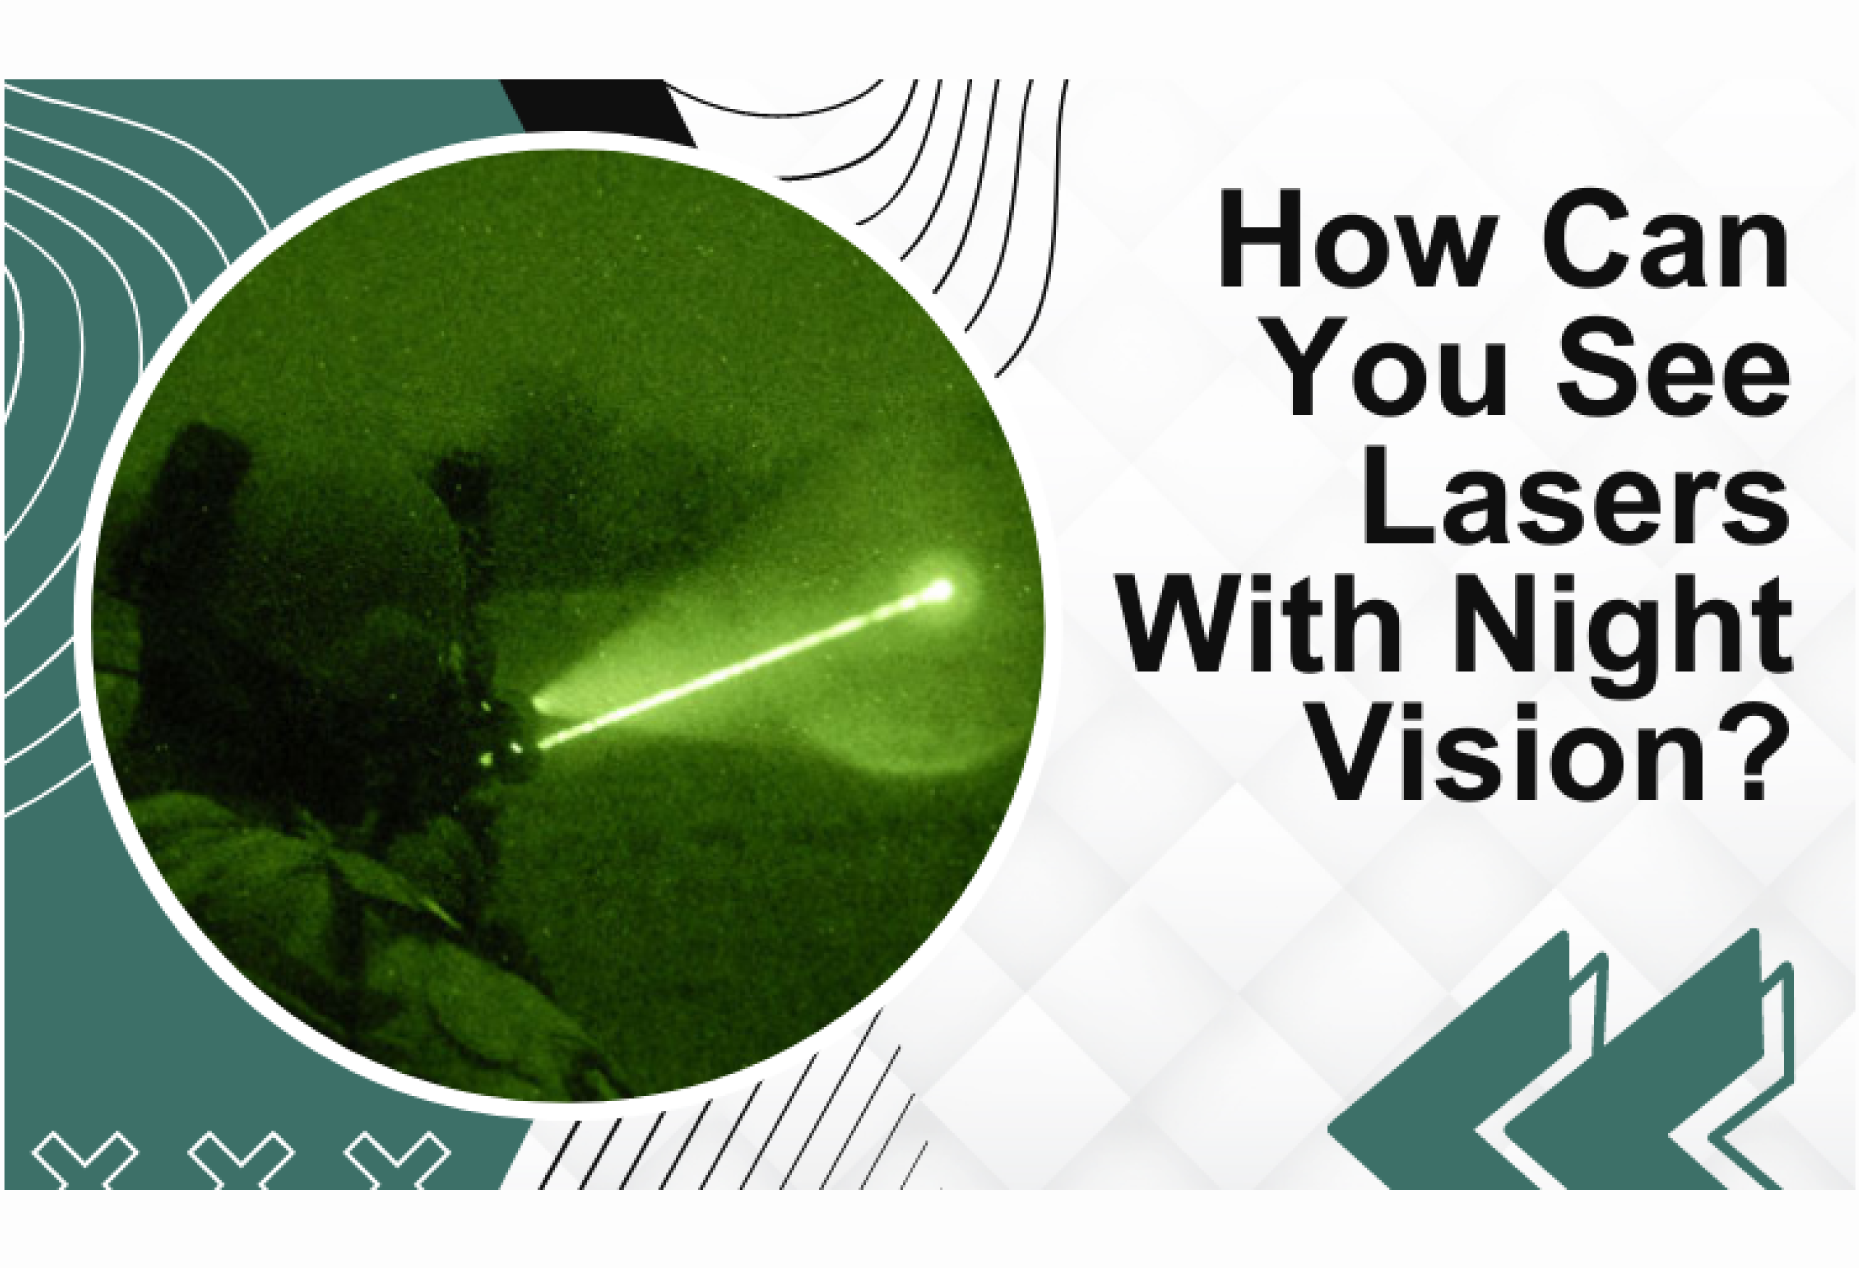 How Can You See Lasers With Night Vision